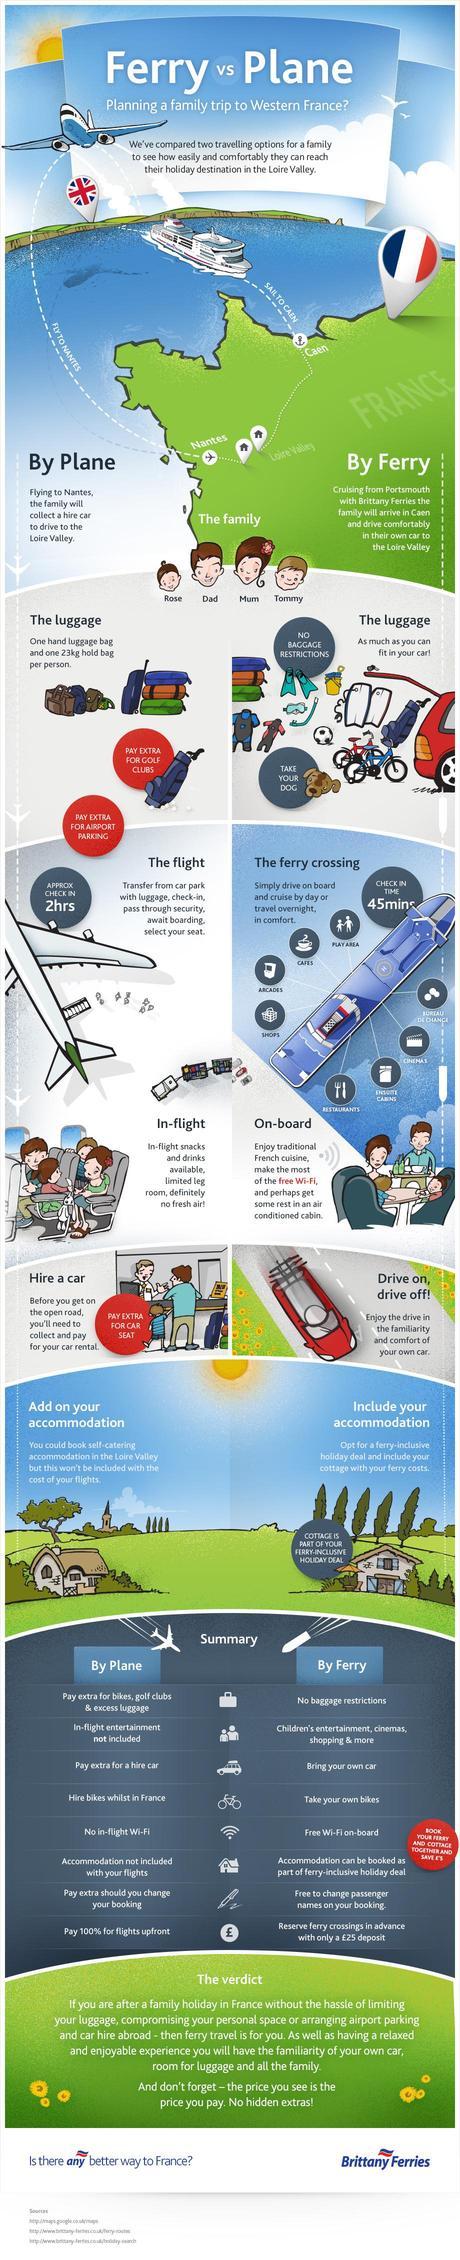 ferry-to-france-vs-plane-infographic